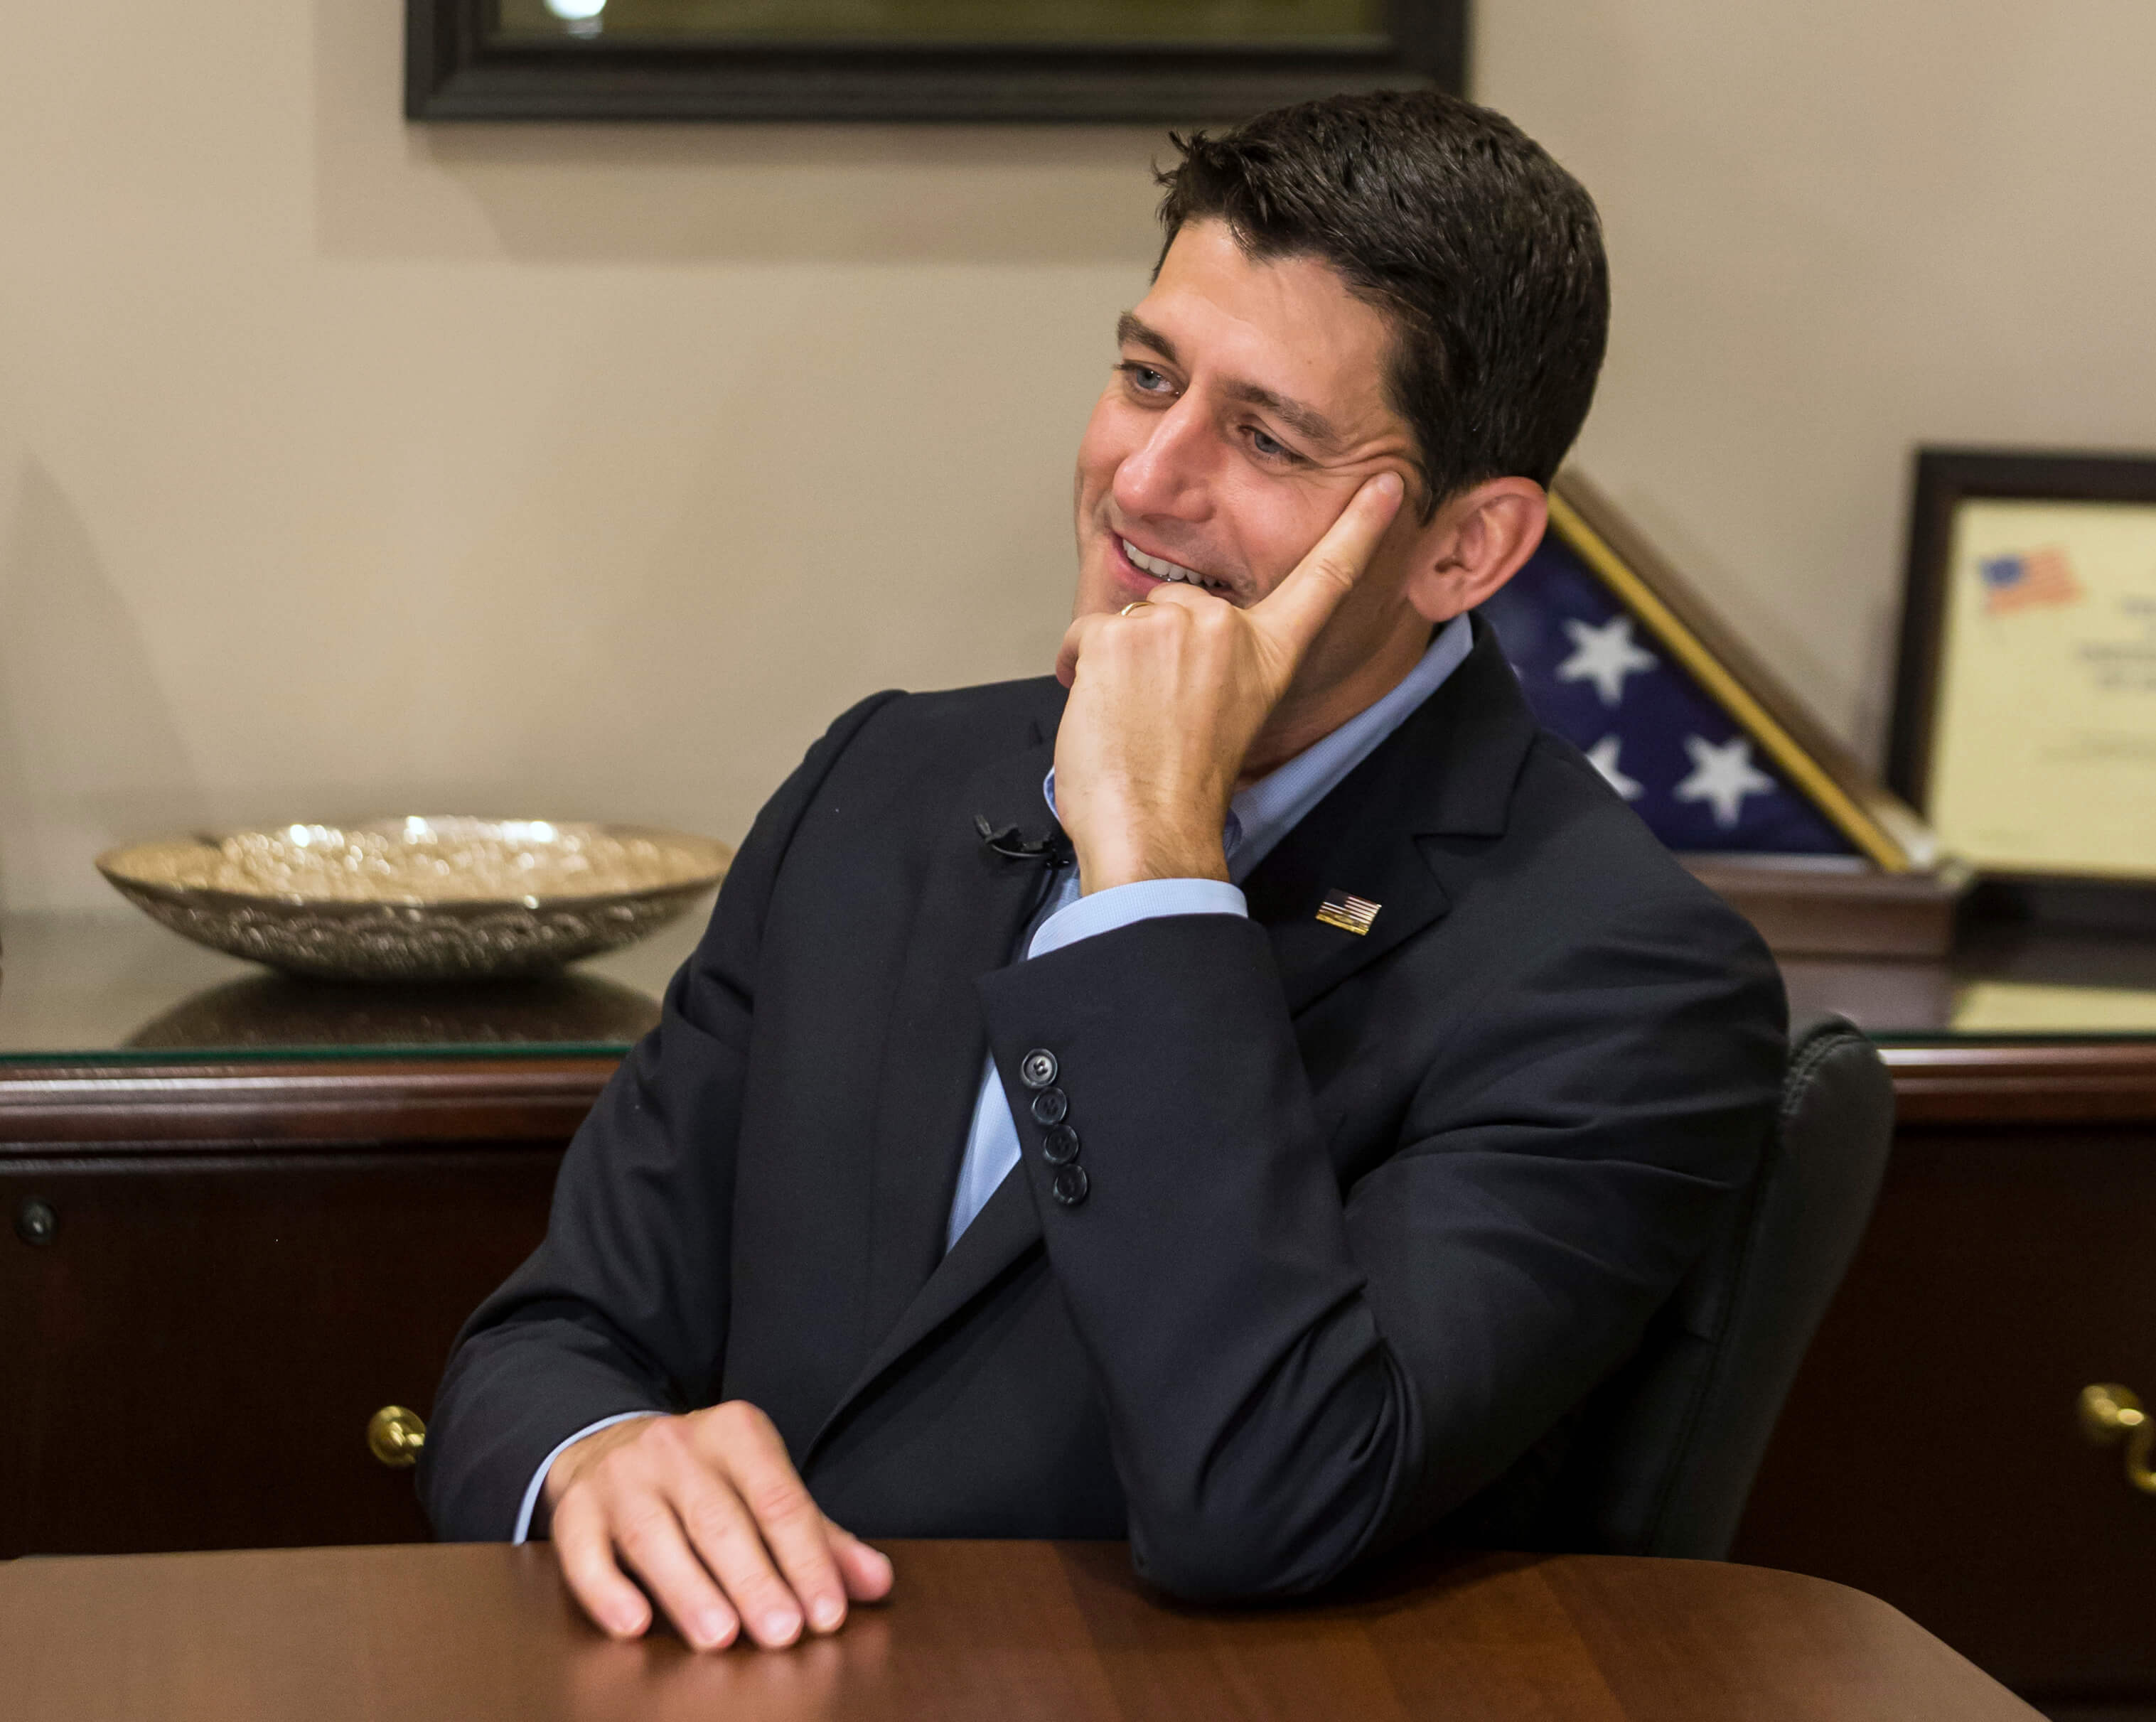 image of Paul Ryan during interview with AP endorsing Trump